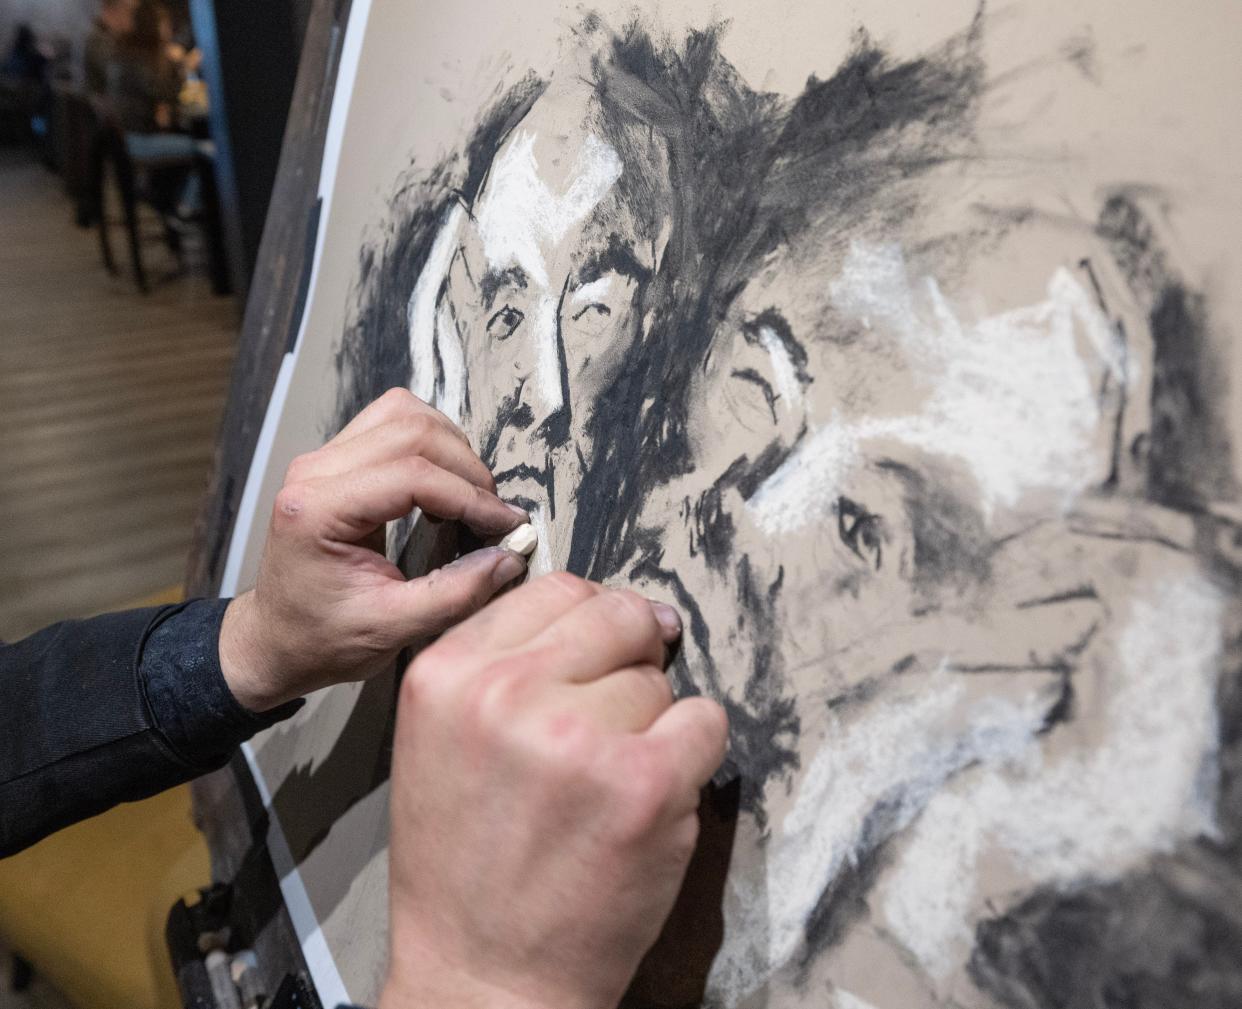 Bruce Budd, owner of The Nook restaurant in the Massillon area, is also an artist. Bruce also creates live art while people eat. He does drawings and portraits, adding to the experience of eating out.